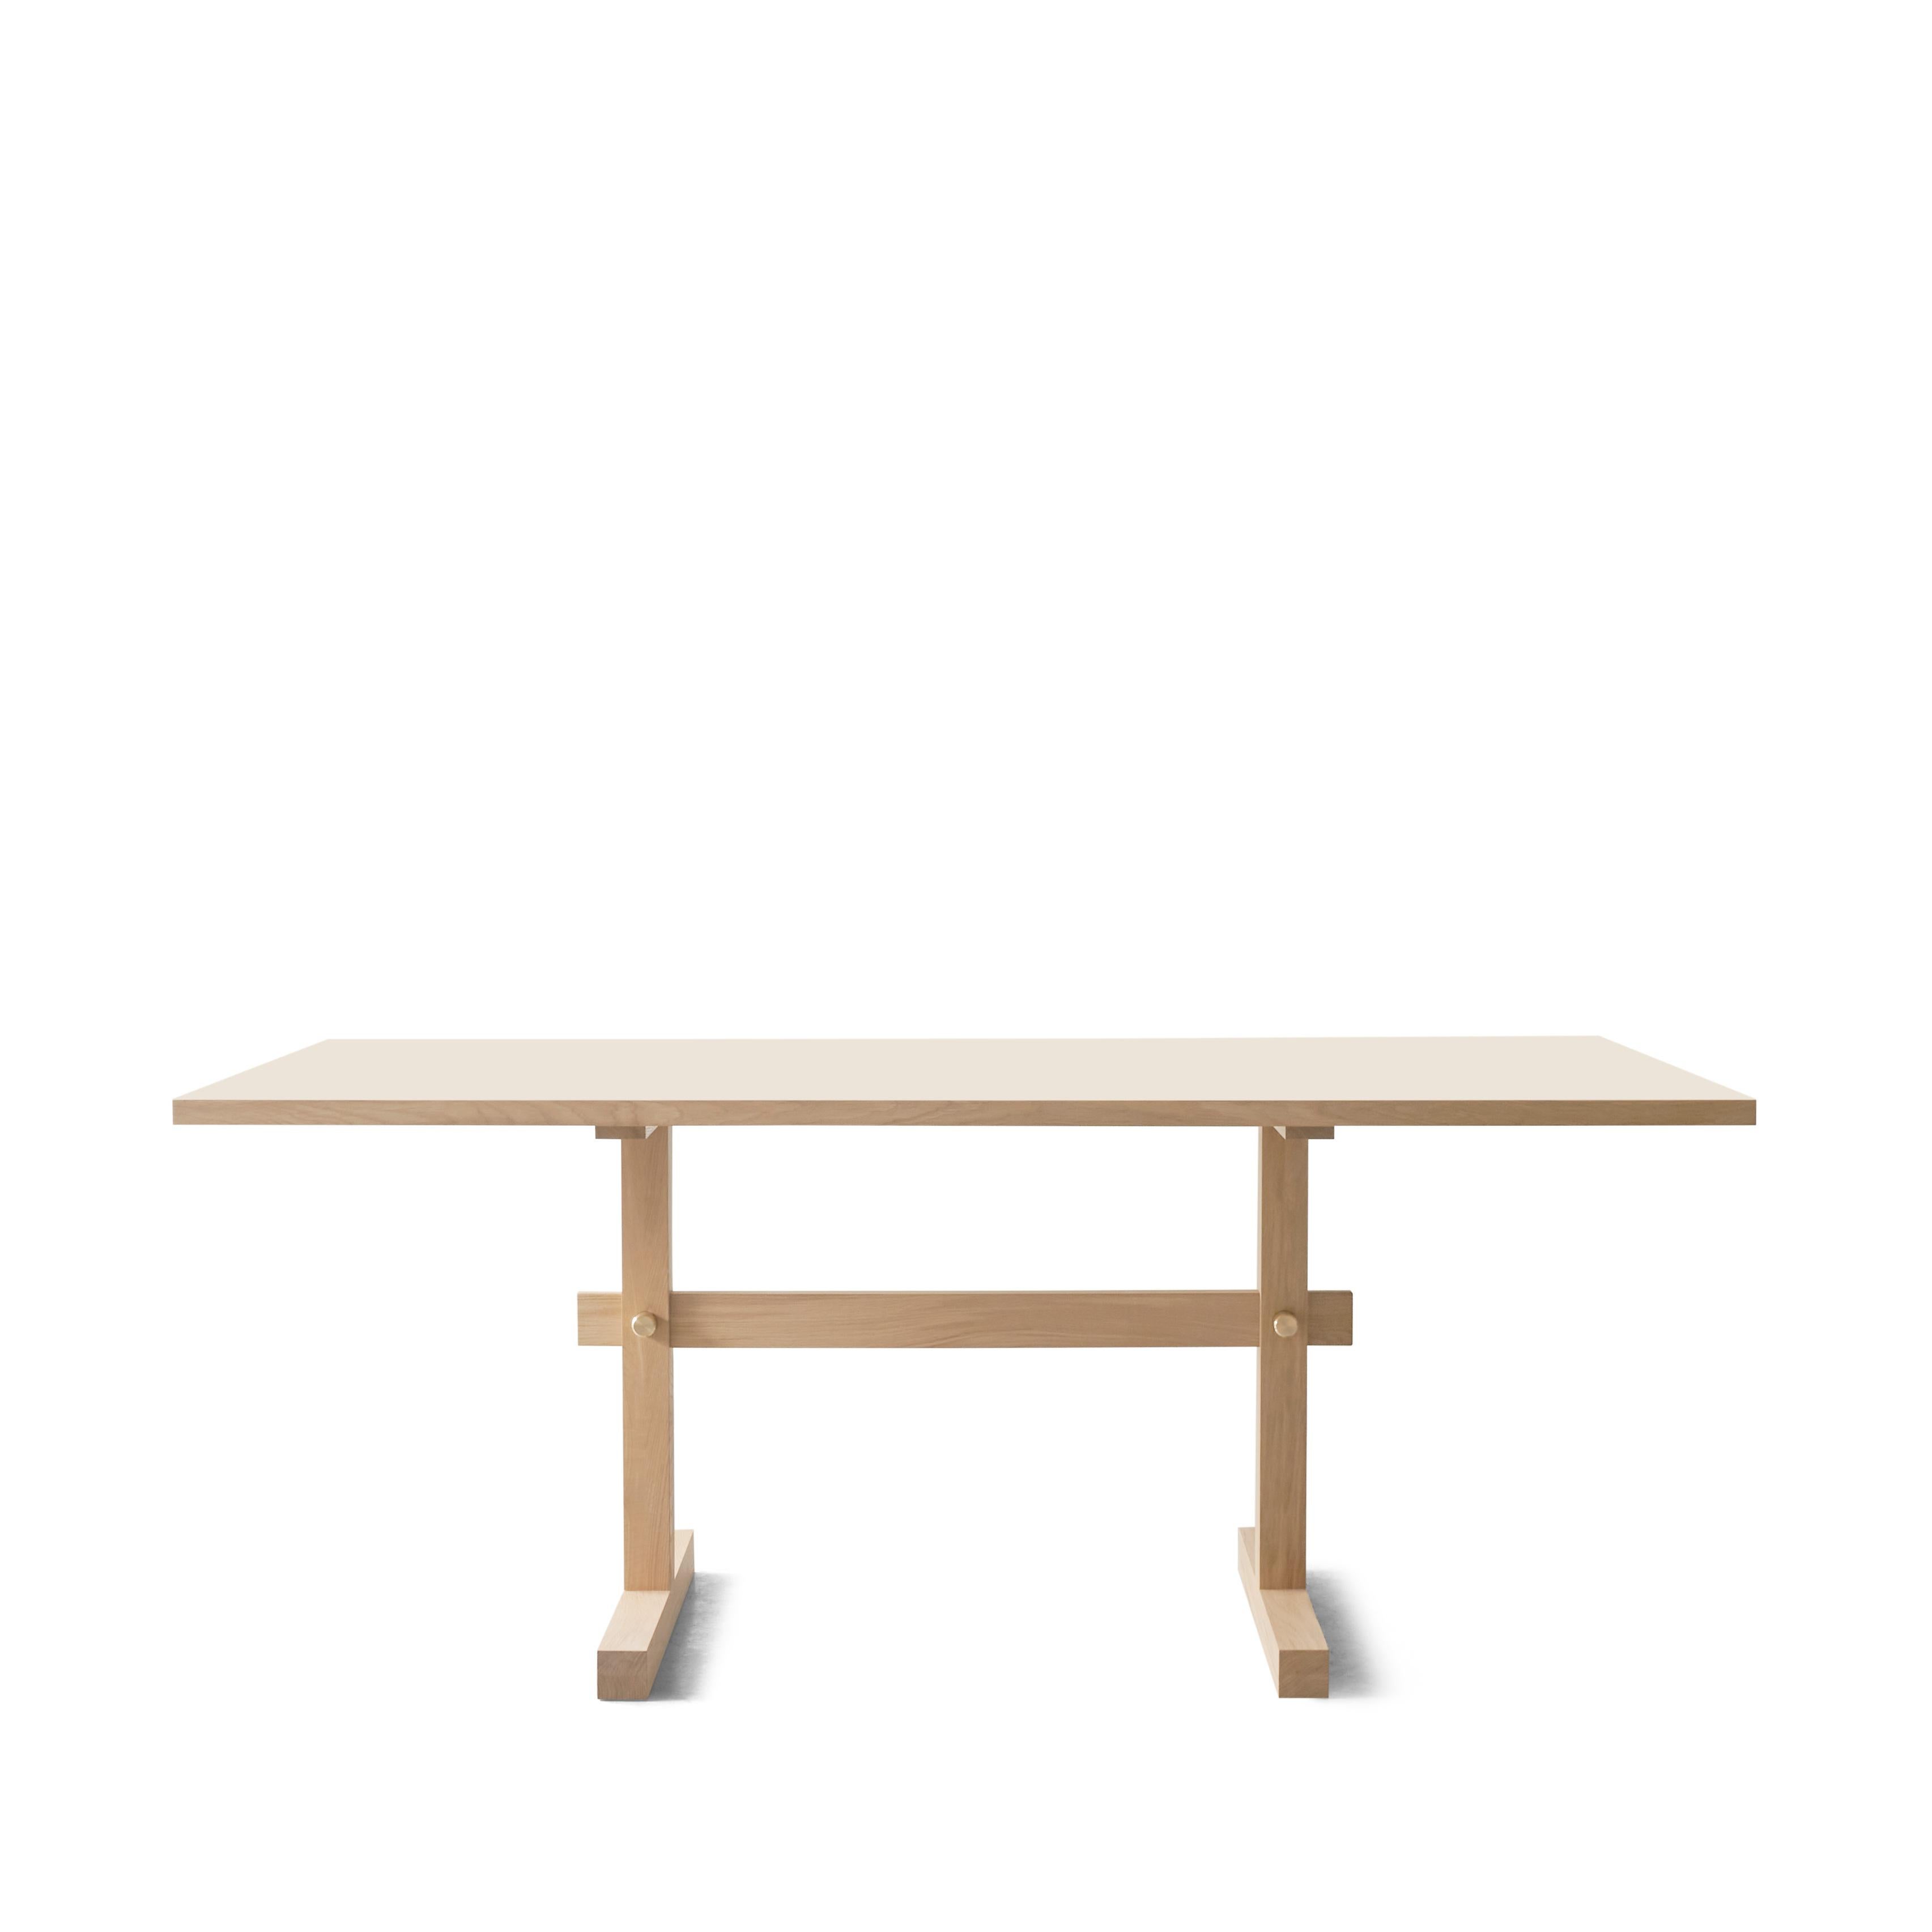 Gaspard dining table is defined by a stringent silhouette and clean lines. The clinical level of details and caricatured simplicity, makes the material speak for itself. The construction is practical and simple down to the very last detail, making